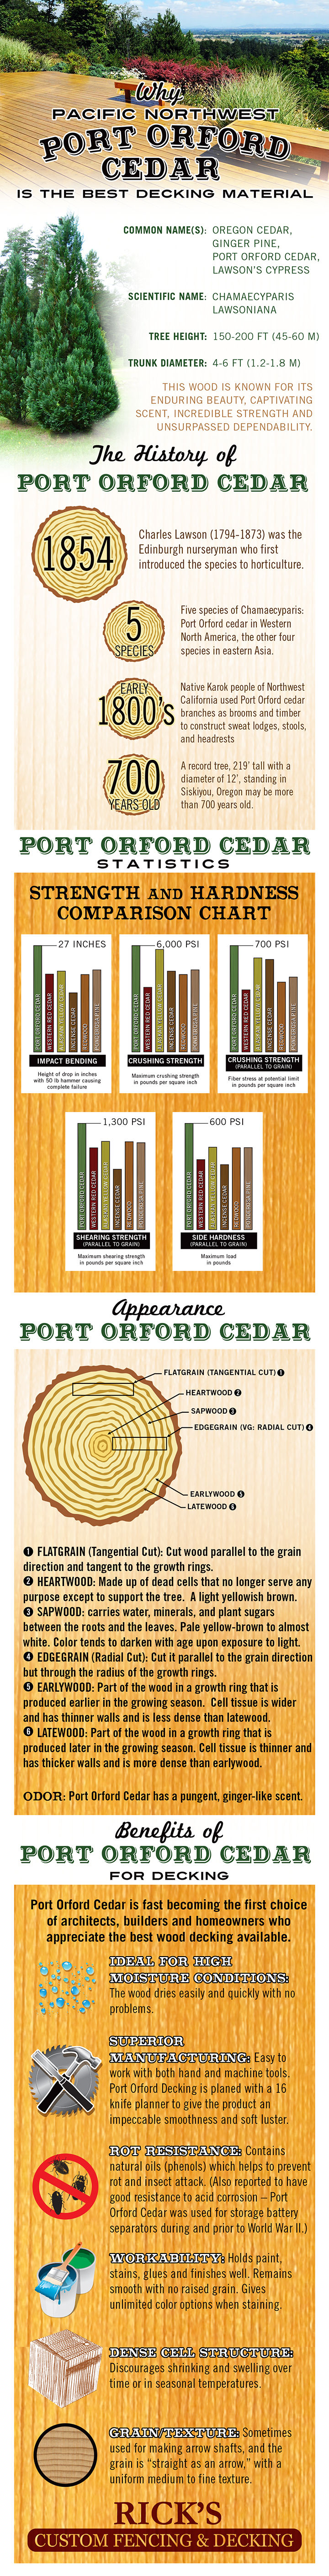 What Makes Pacific Northwest Port Orford Cedar The Best Decking Material